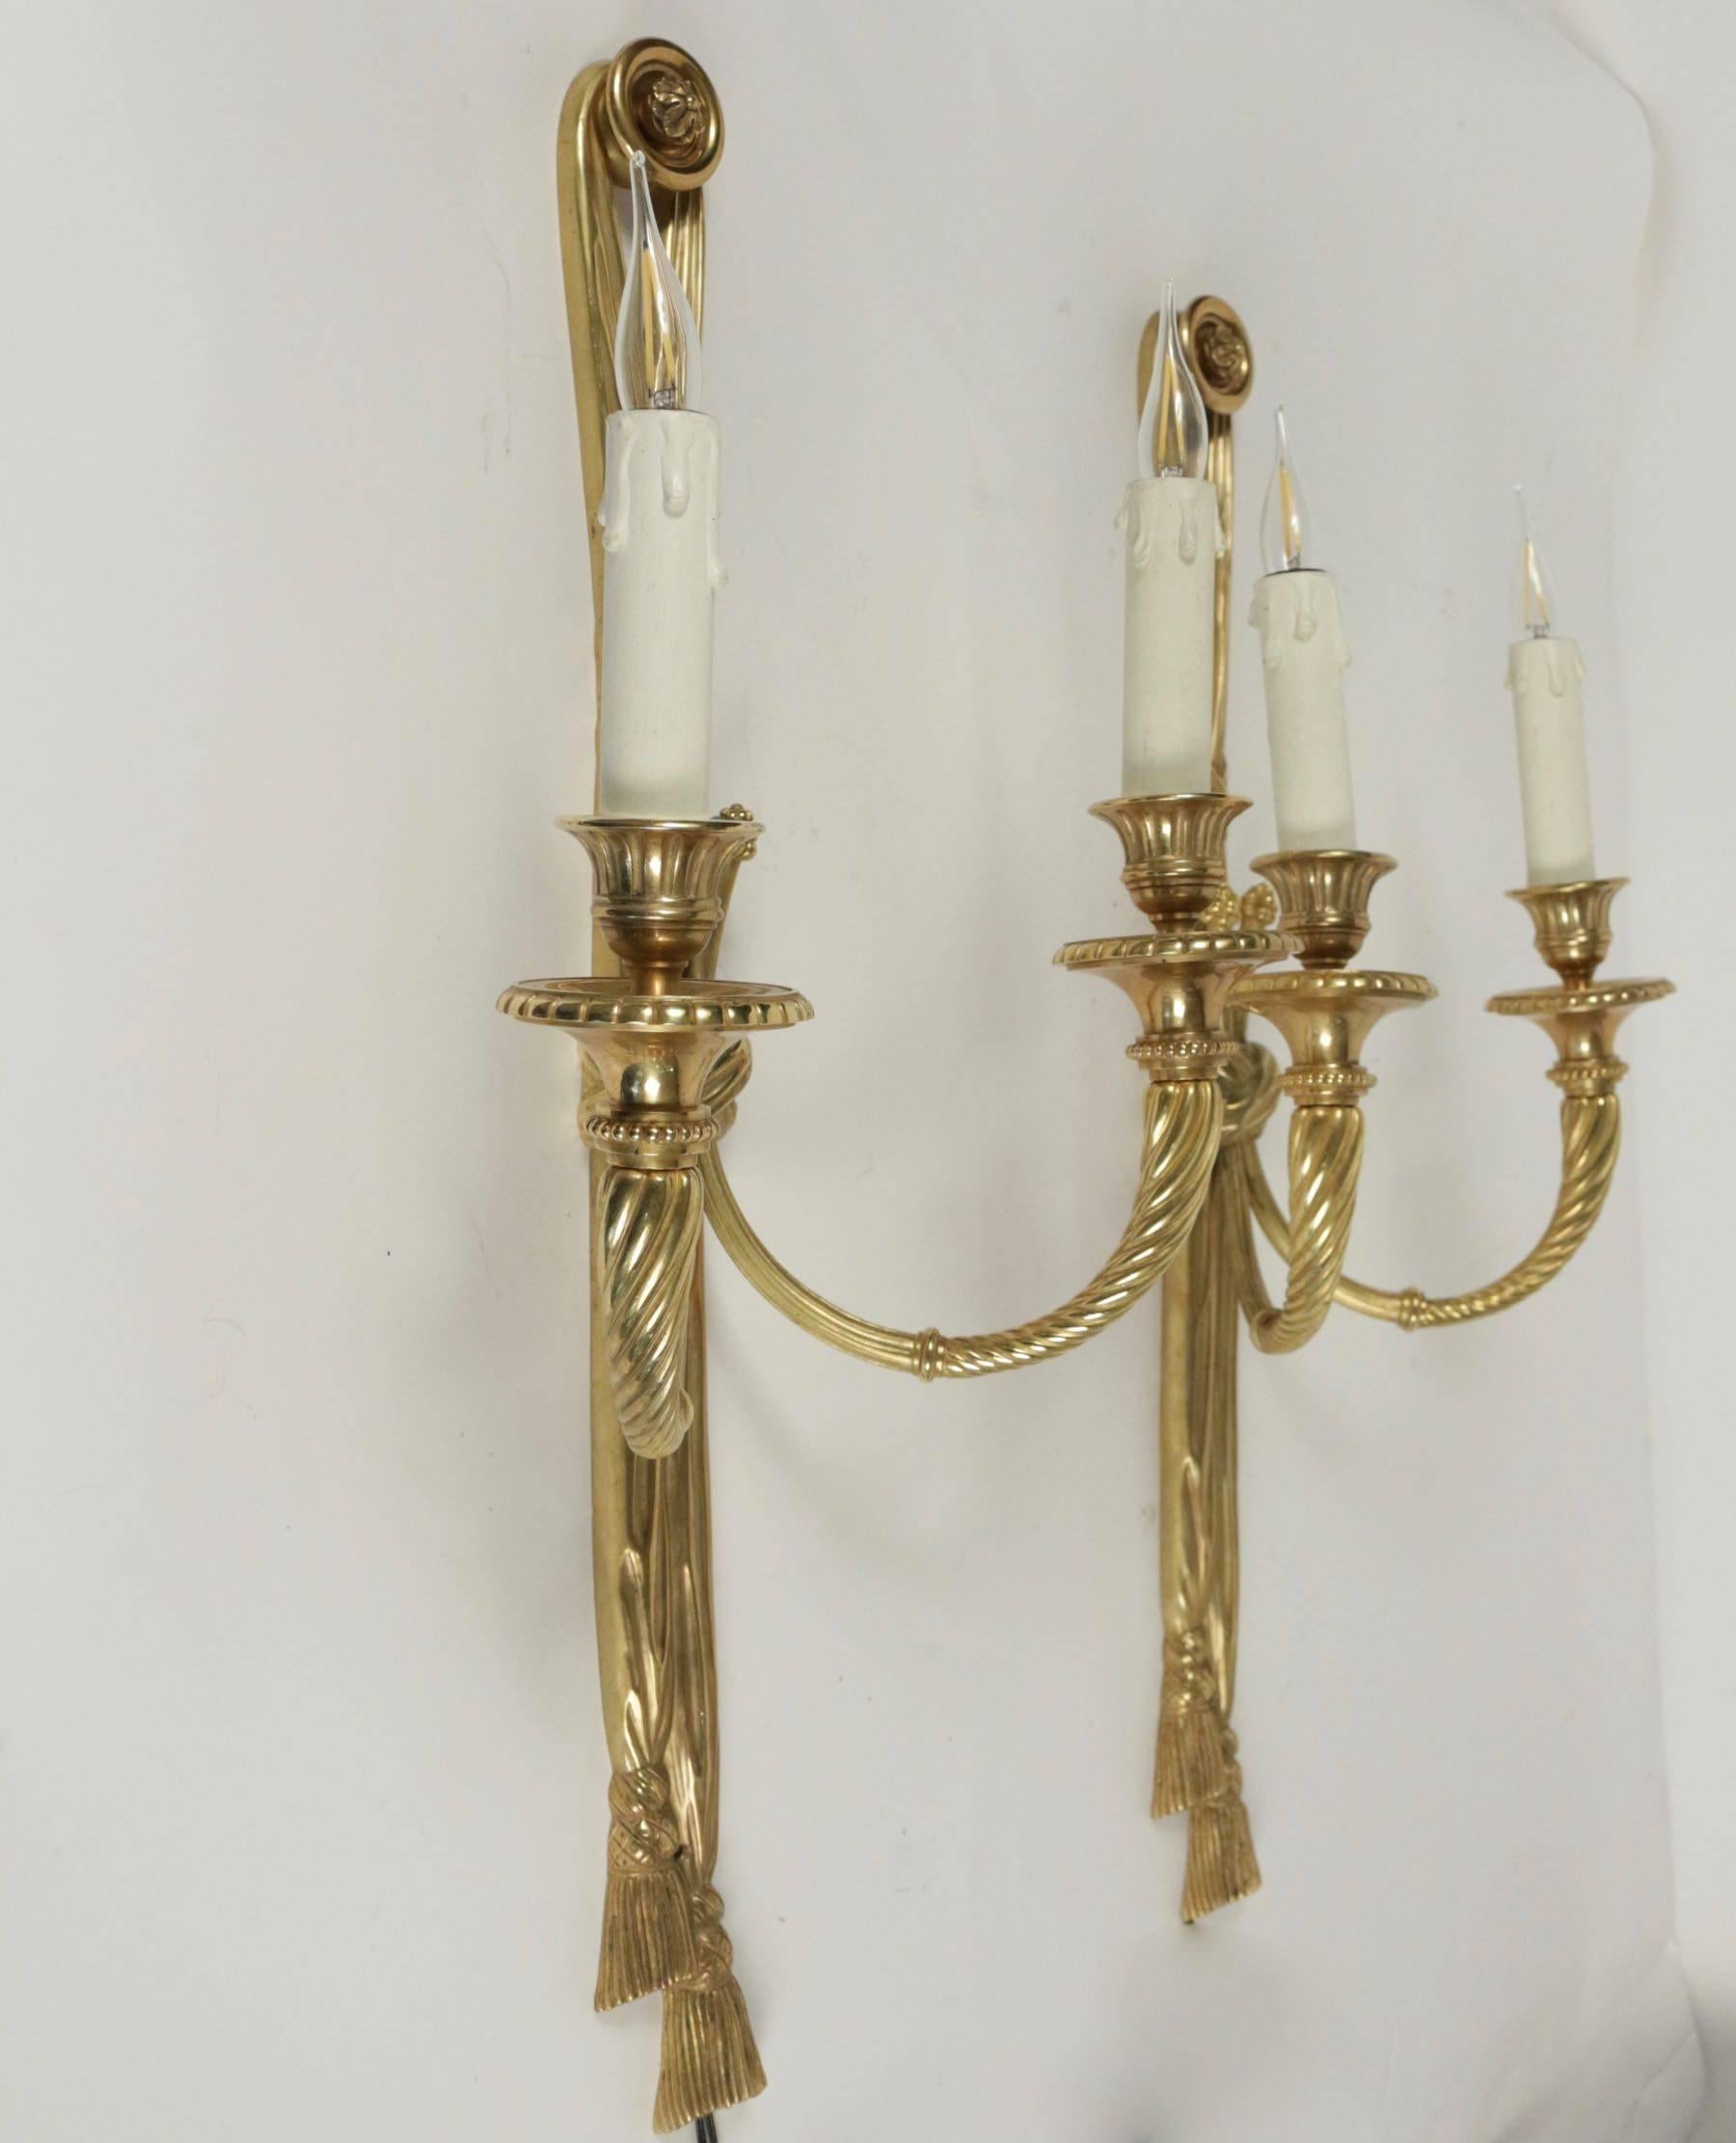 Napoleon III Important Pair of Sconces in the Style of Louis XVI from the 19th Century